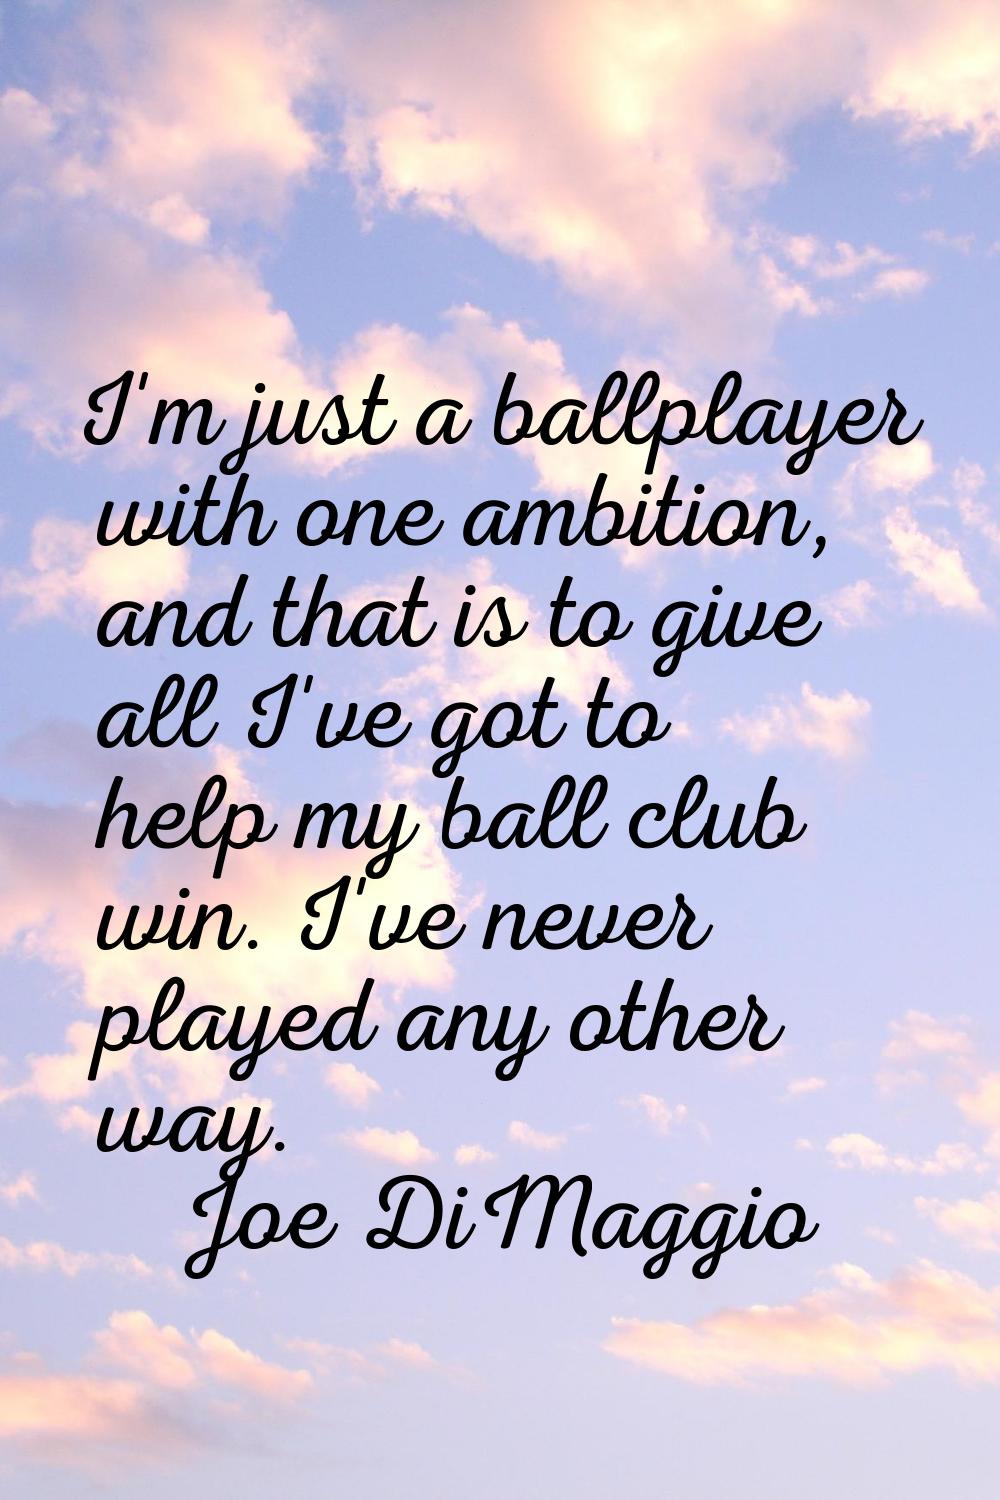 I'm just a ballplayer with one ambition, and that is to give all I've got to help my ball club win.